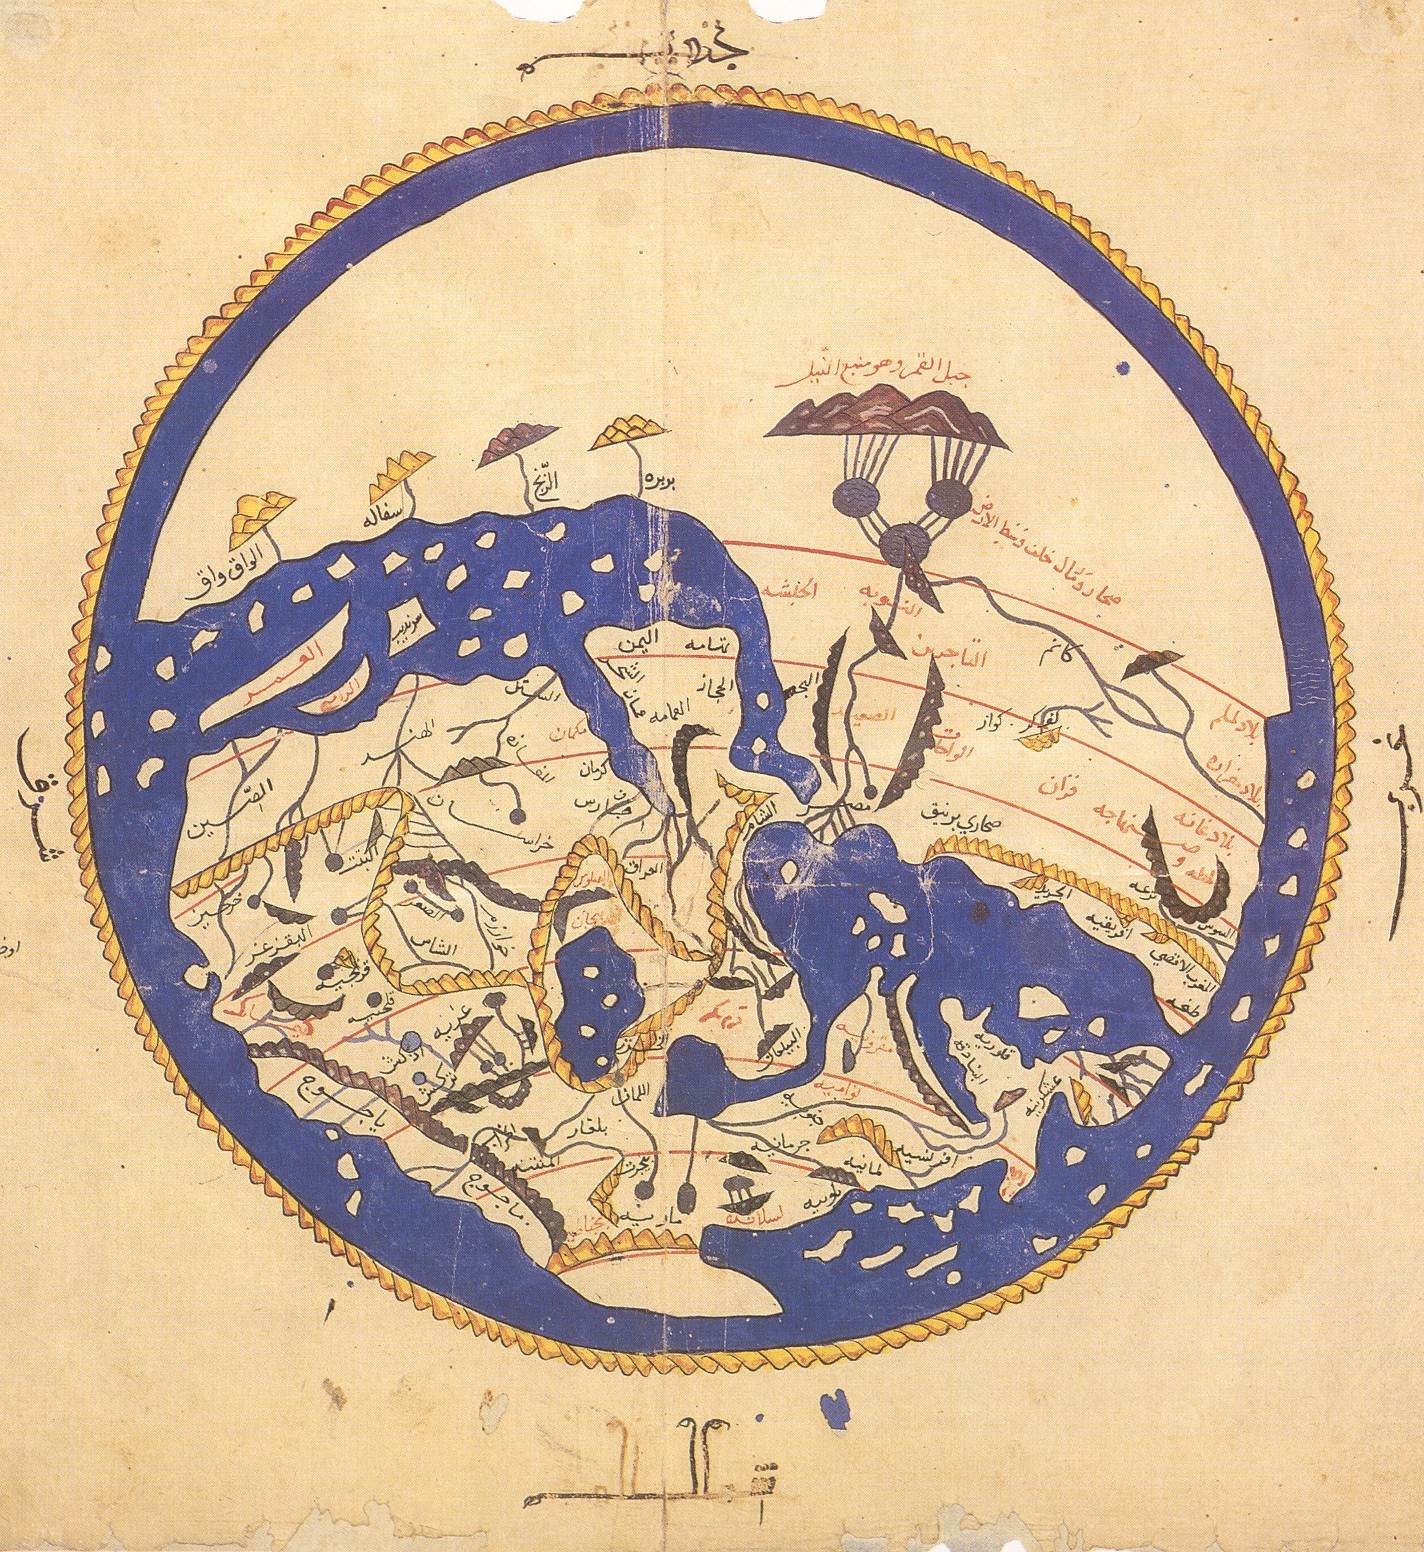 Mounts of Qaf surrounds the world according to Idrisse’s map (1100 – 1165). Source: Wikipedia